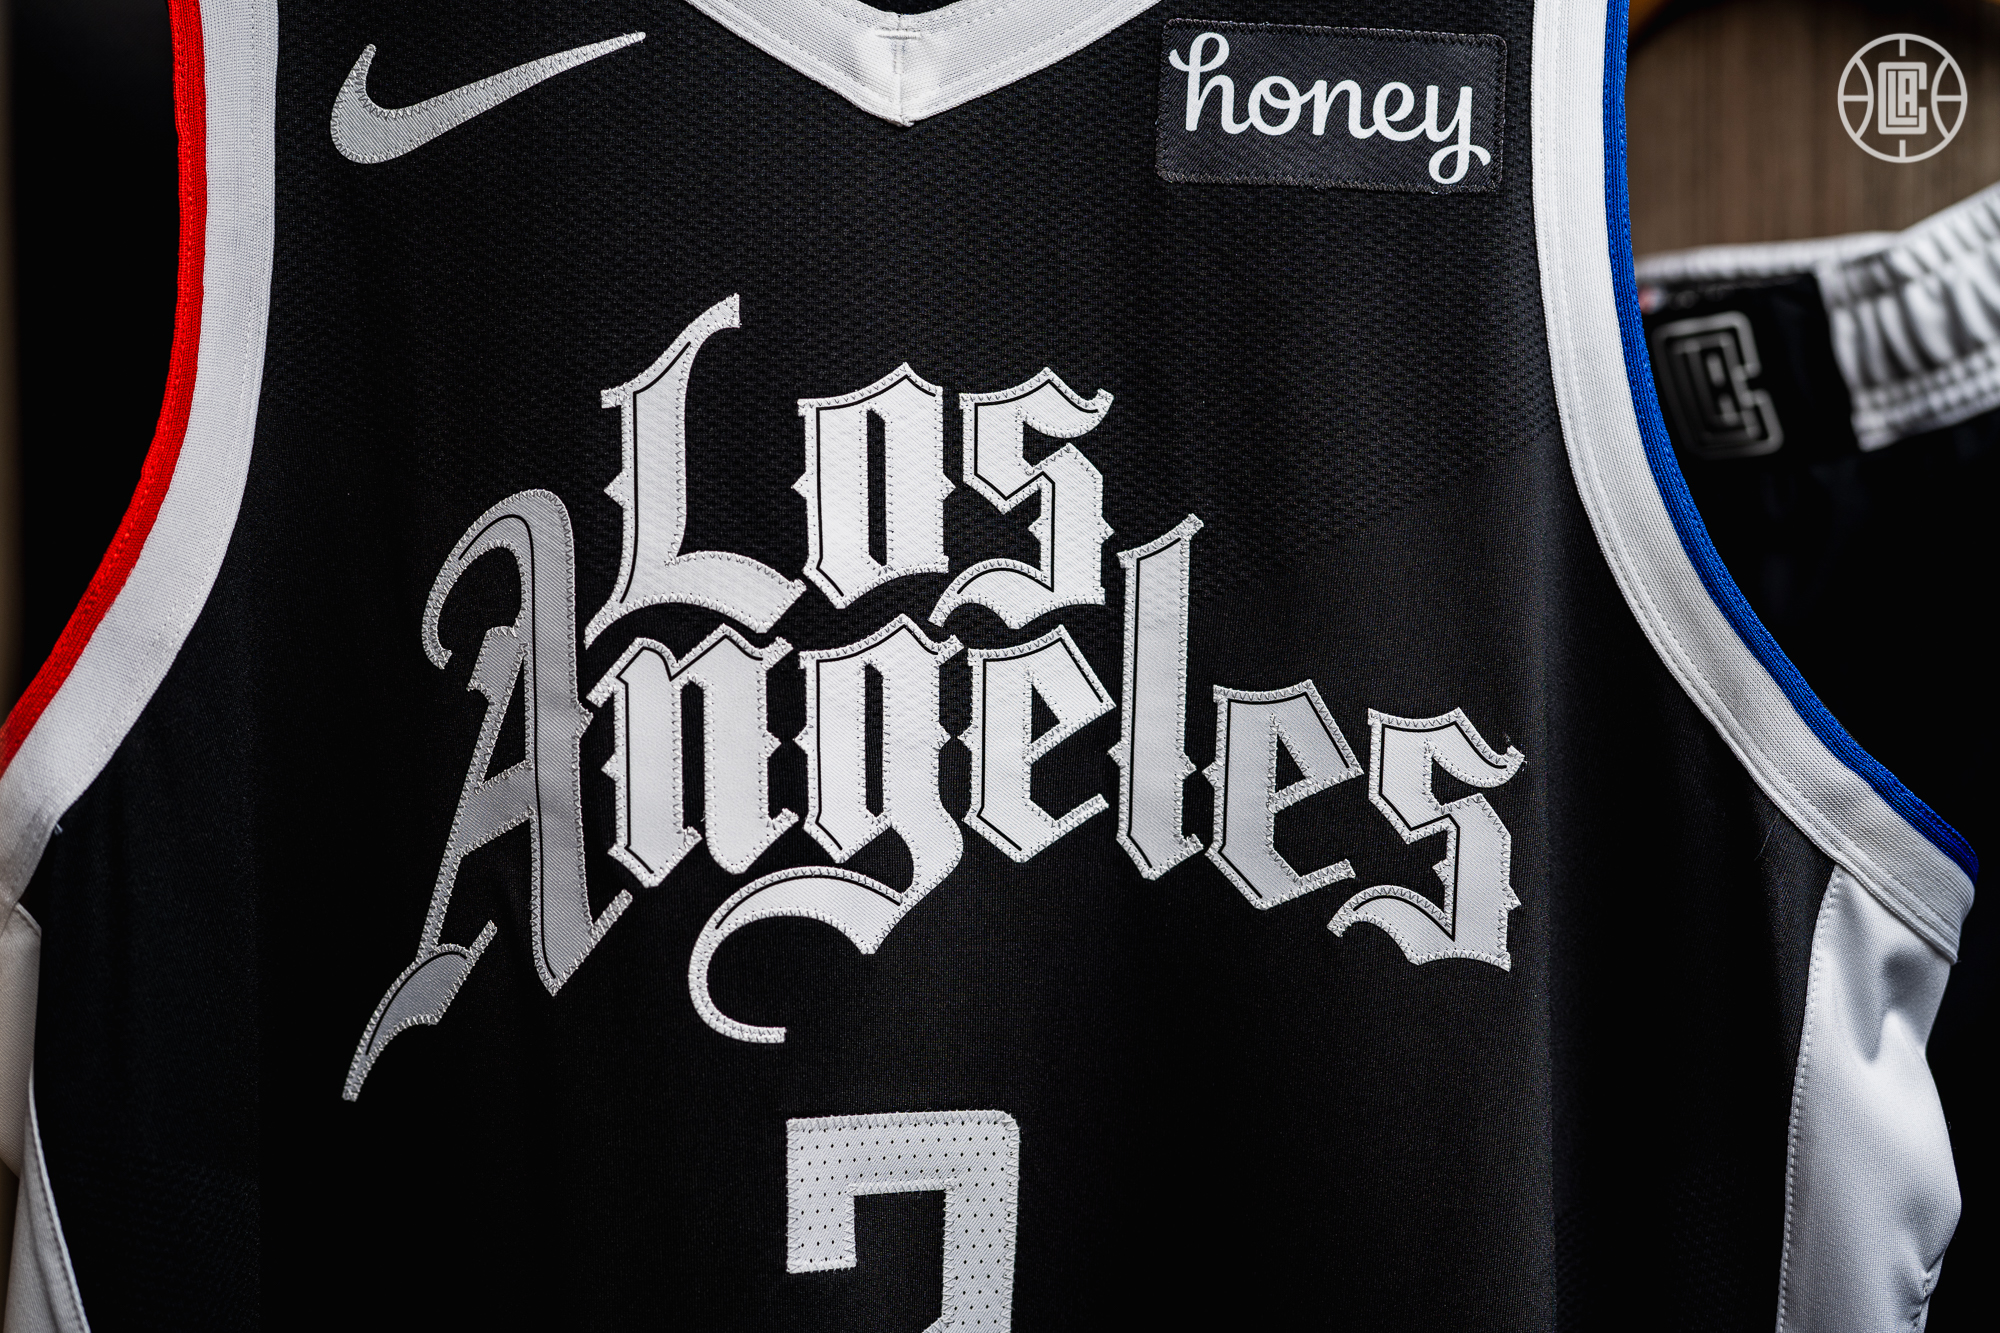 Los Angeles Clippers drops new Nike City Edition Jersey